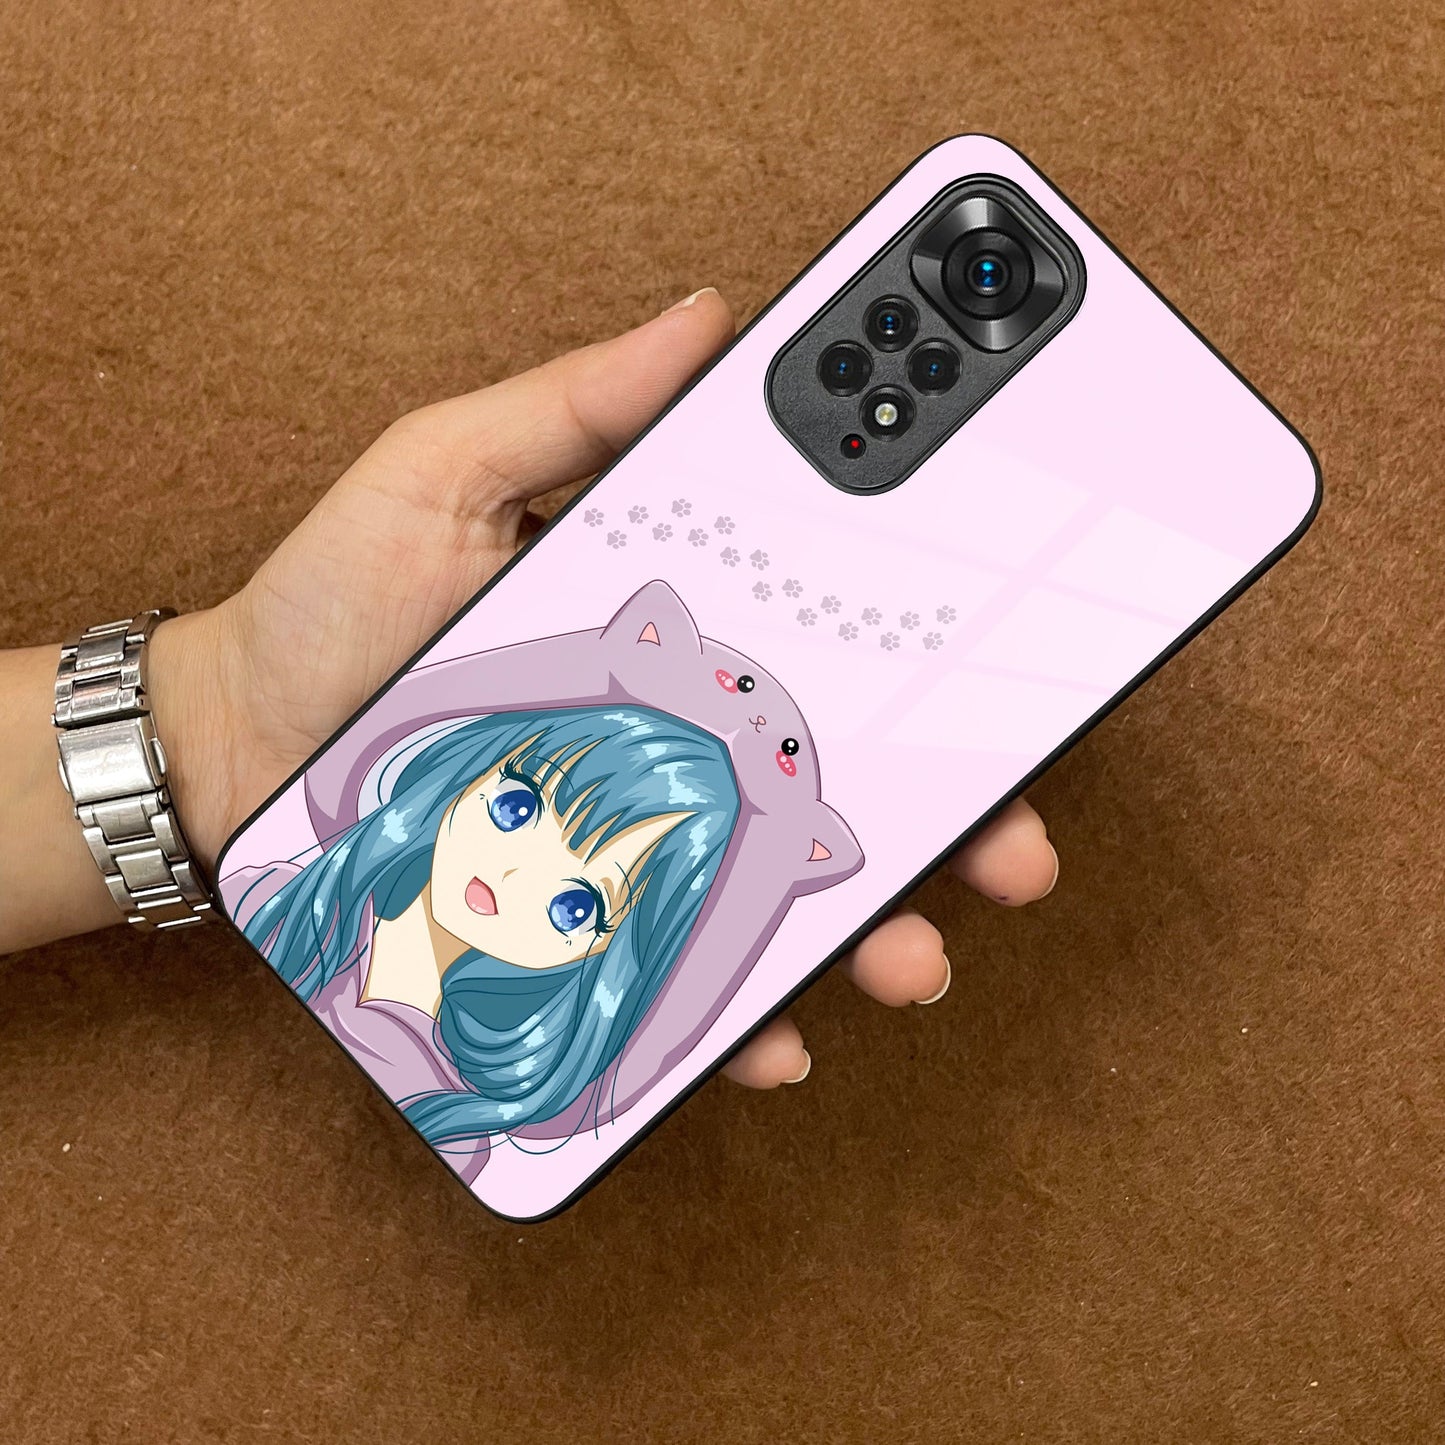 Purple Aesthetic Girl With Cat Phone Glass Case Cover For Redmi/Xiaomi ShopOnCliQ